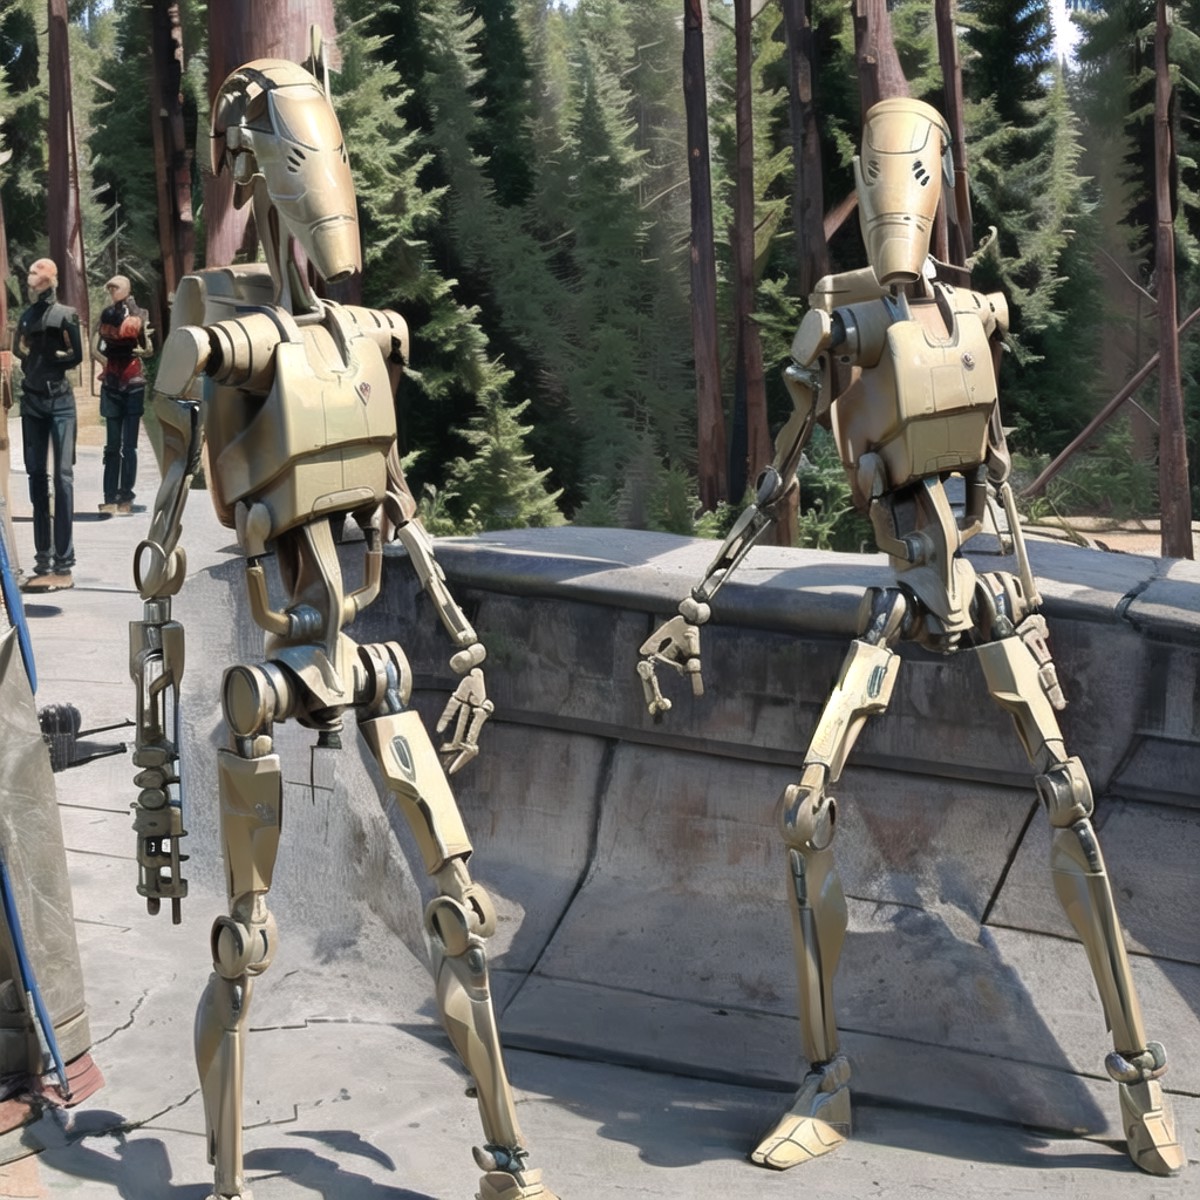 non-humanoid battle-droid B1 battle droid, B1 running, solo, action, no humans, robot, mecha, forest background